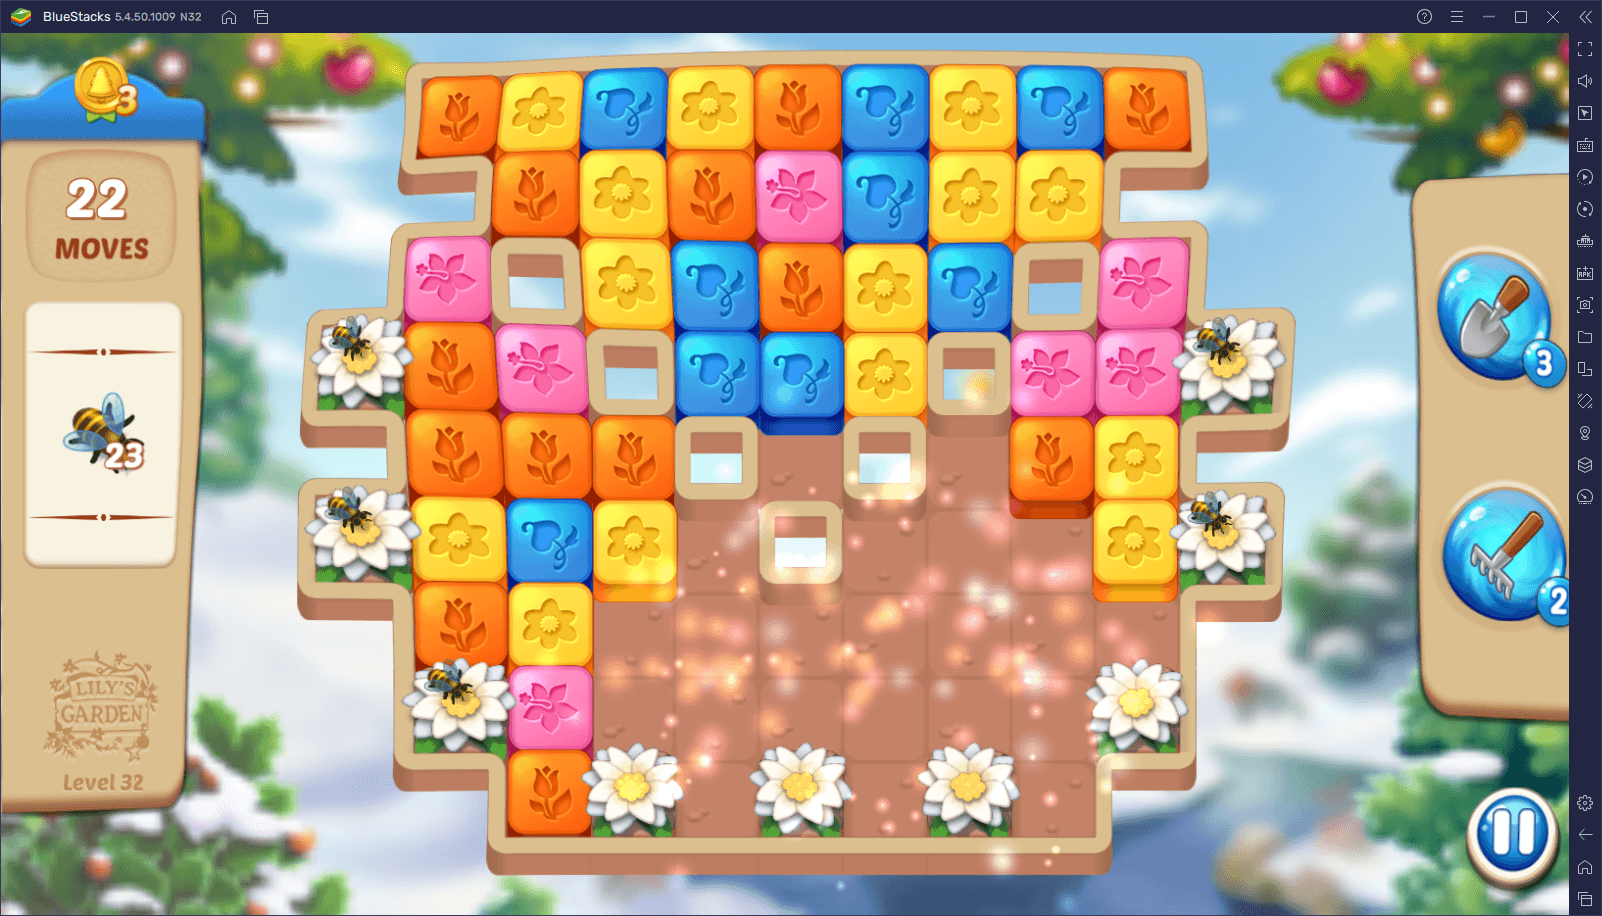 The Best Tips, Tricks, and Strategies for Lily’s Garden